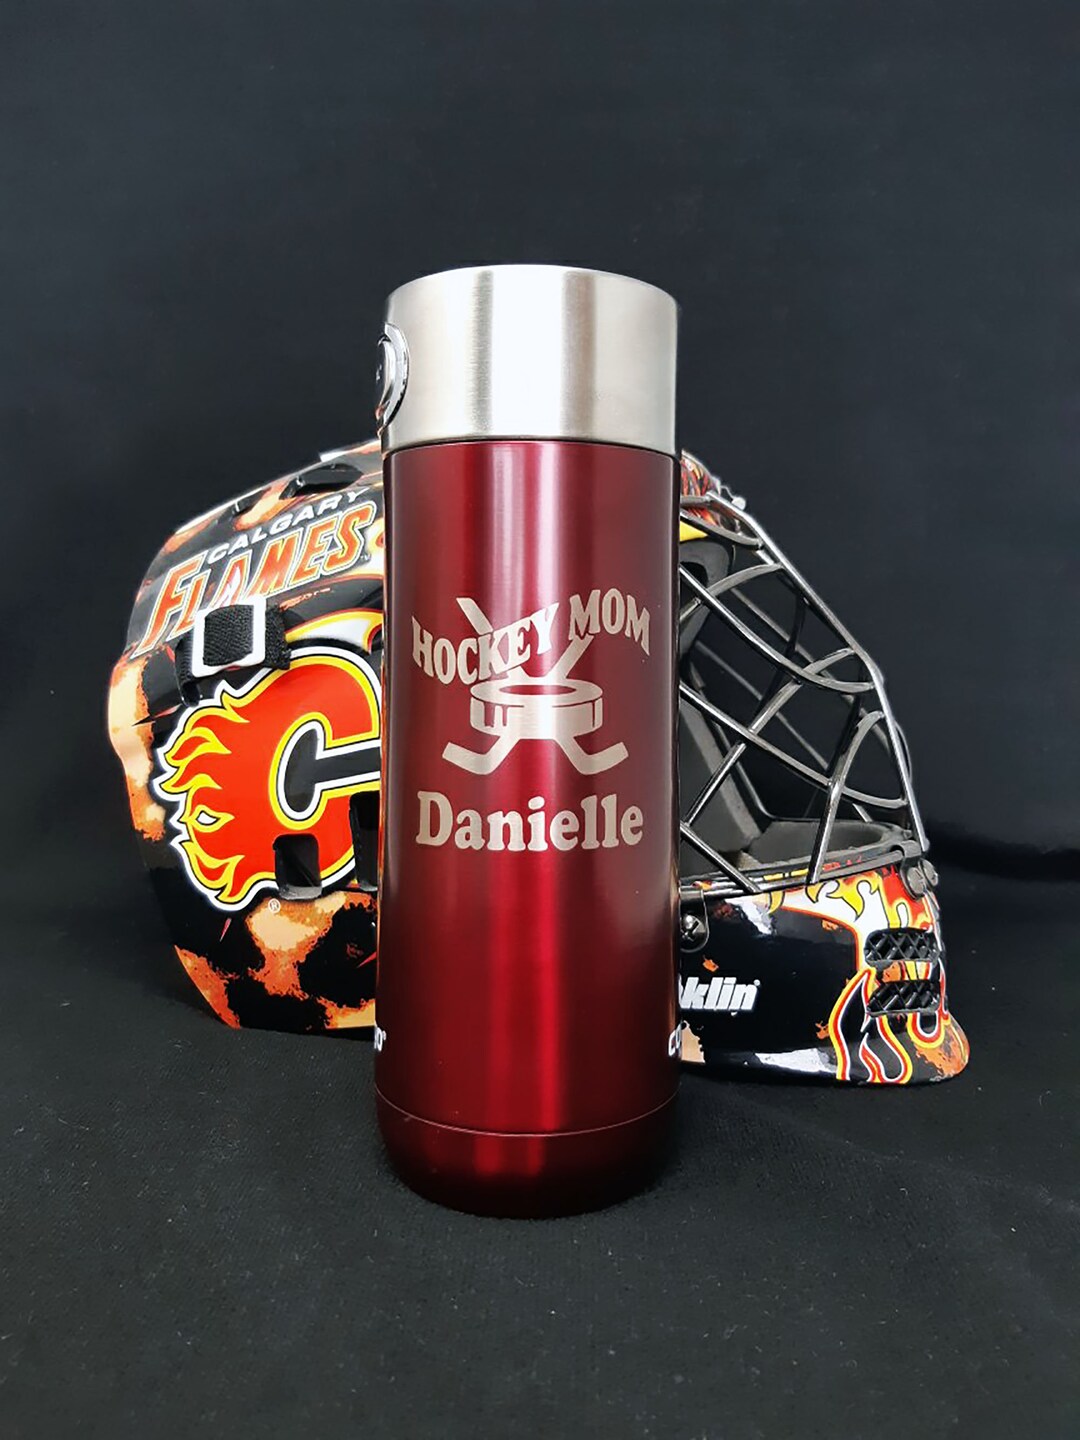 Personalized Travel Mug, 14 Oz. Contigo Luxe Insulated Tumbler Custom  Engraved Stainless Steel Coffee Mug Father's Day Gift, 